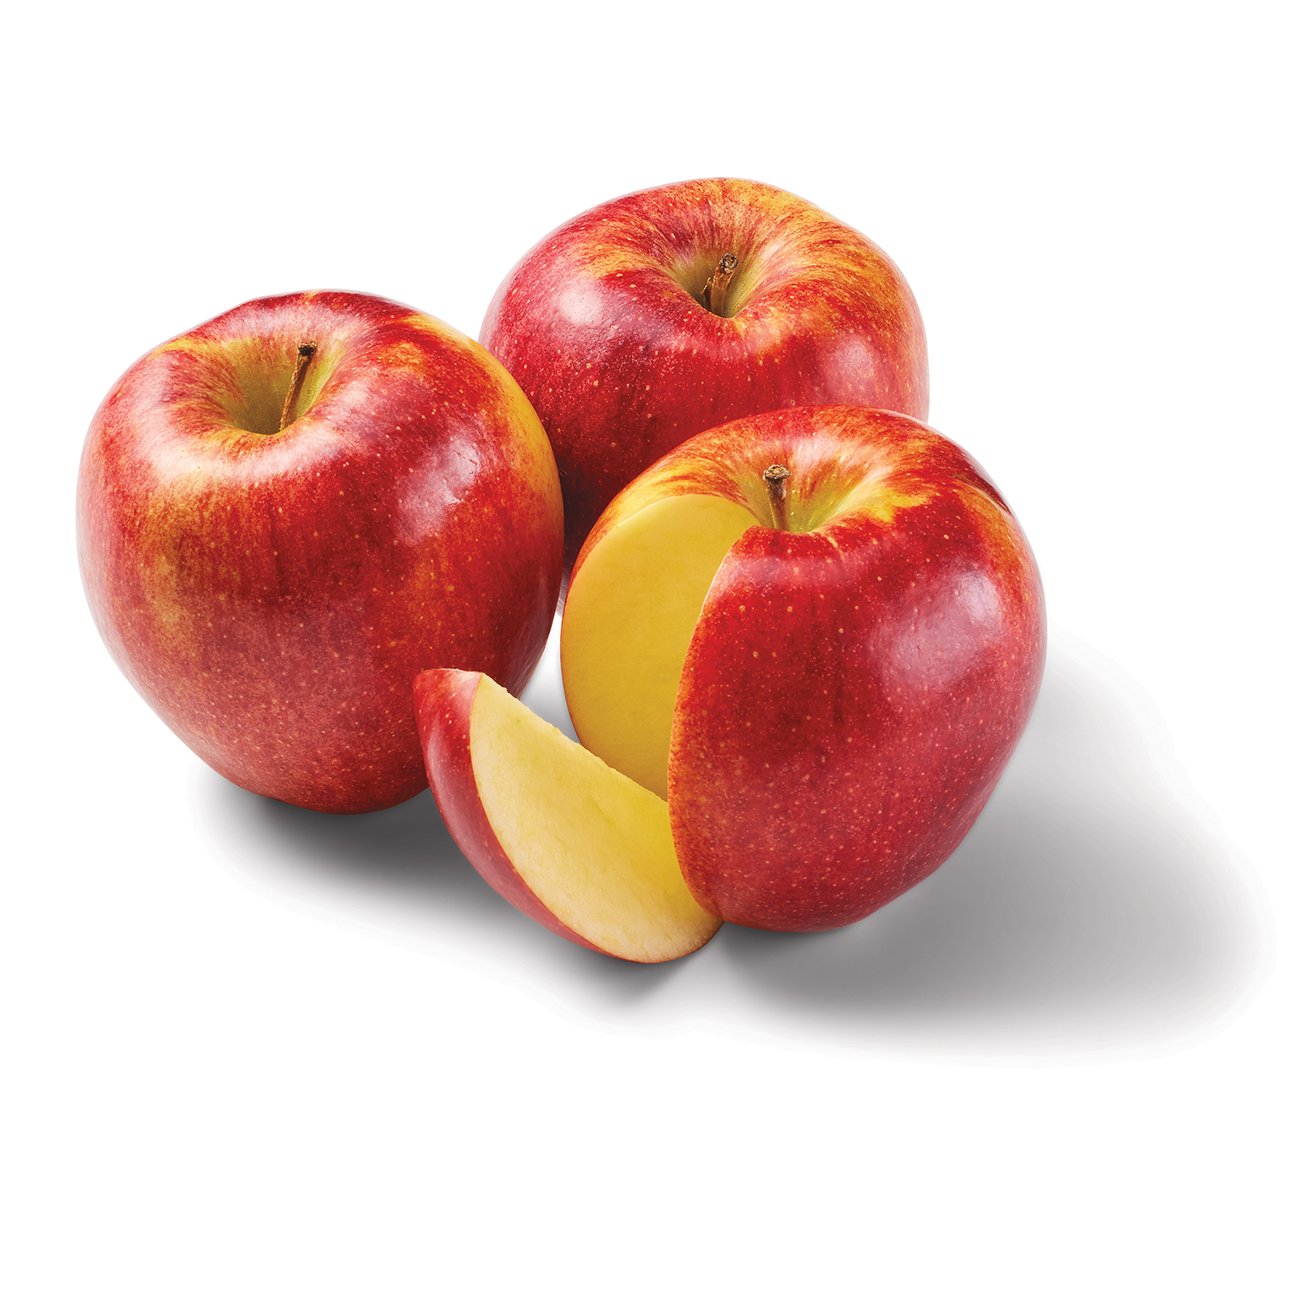 Fresh Bagged Sweetie Apples - Shop Apples at H-E-B